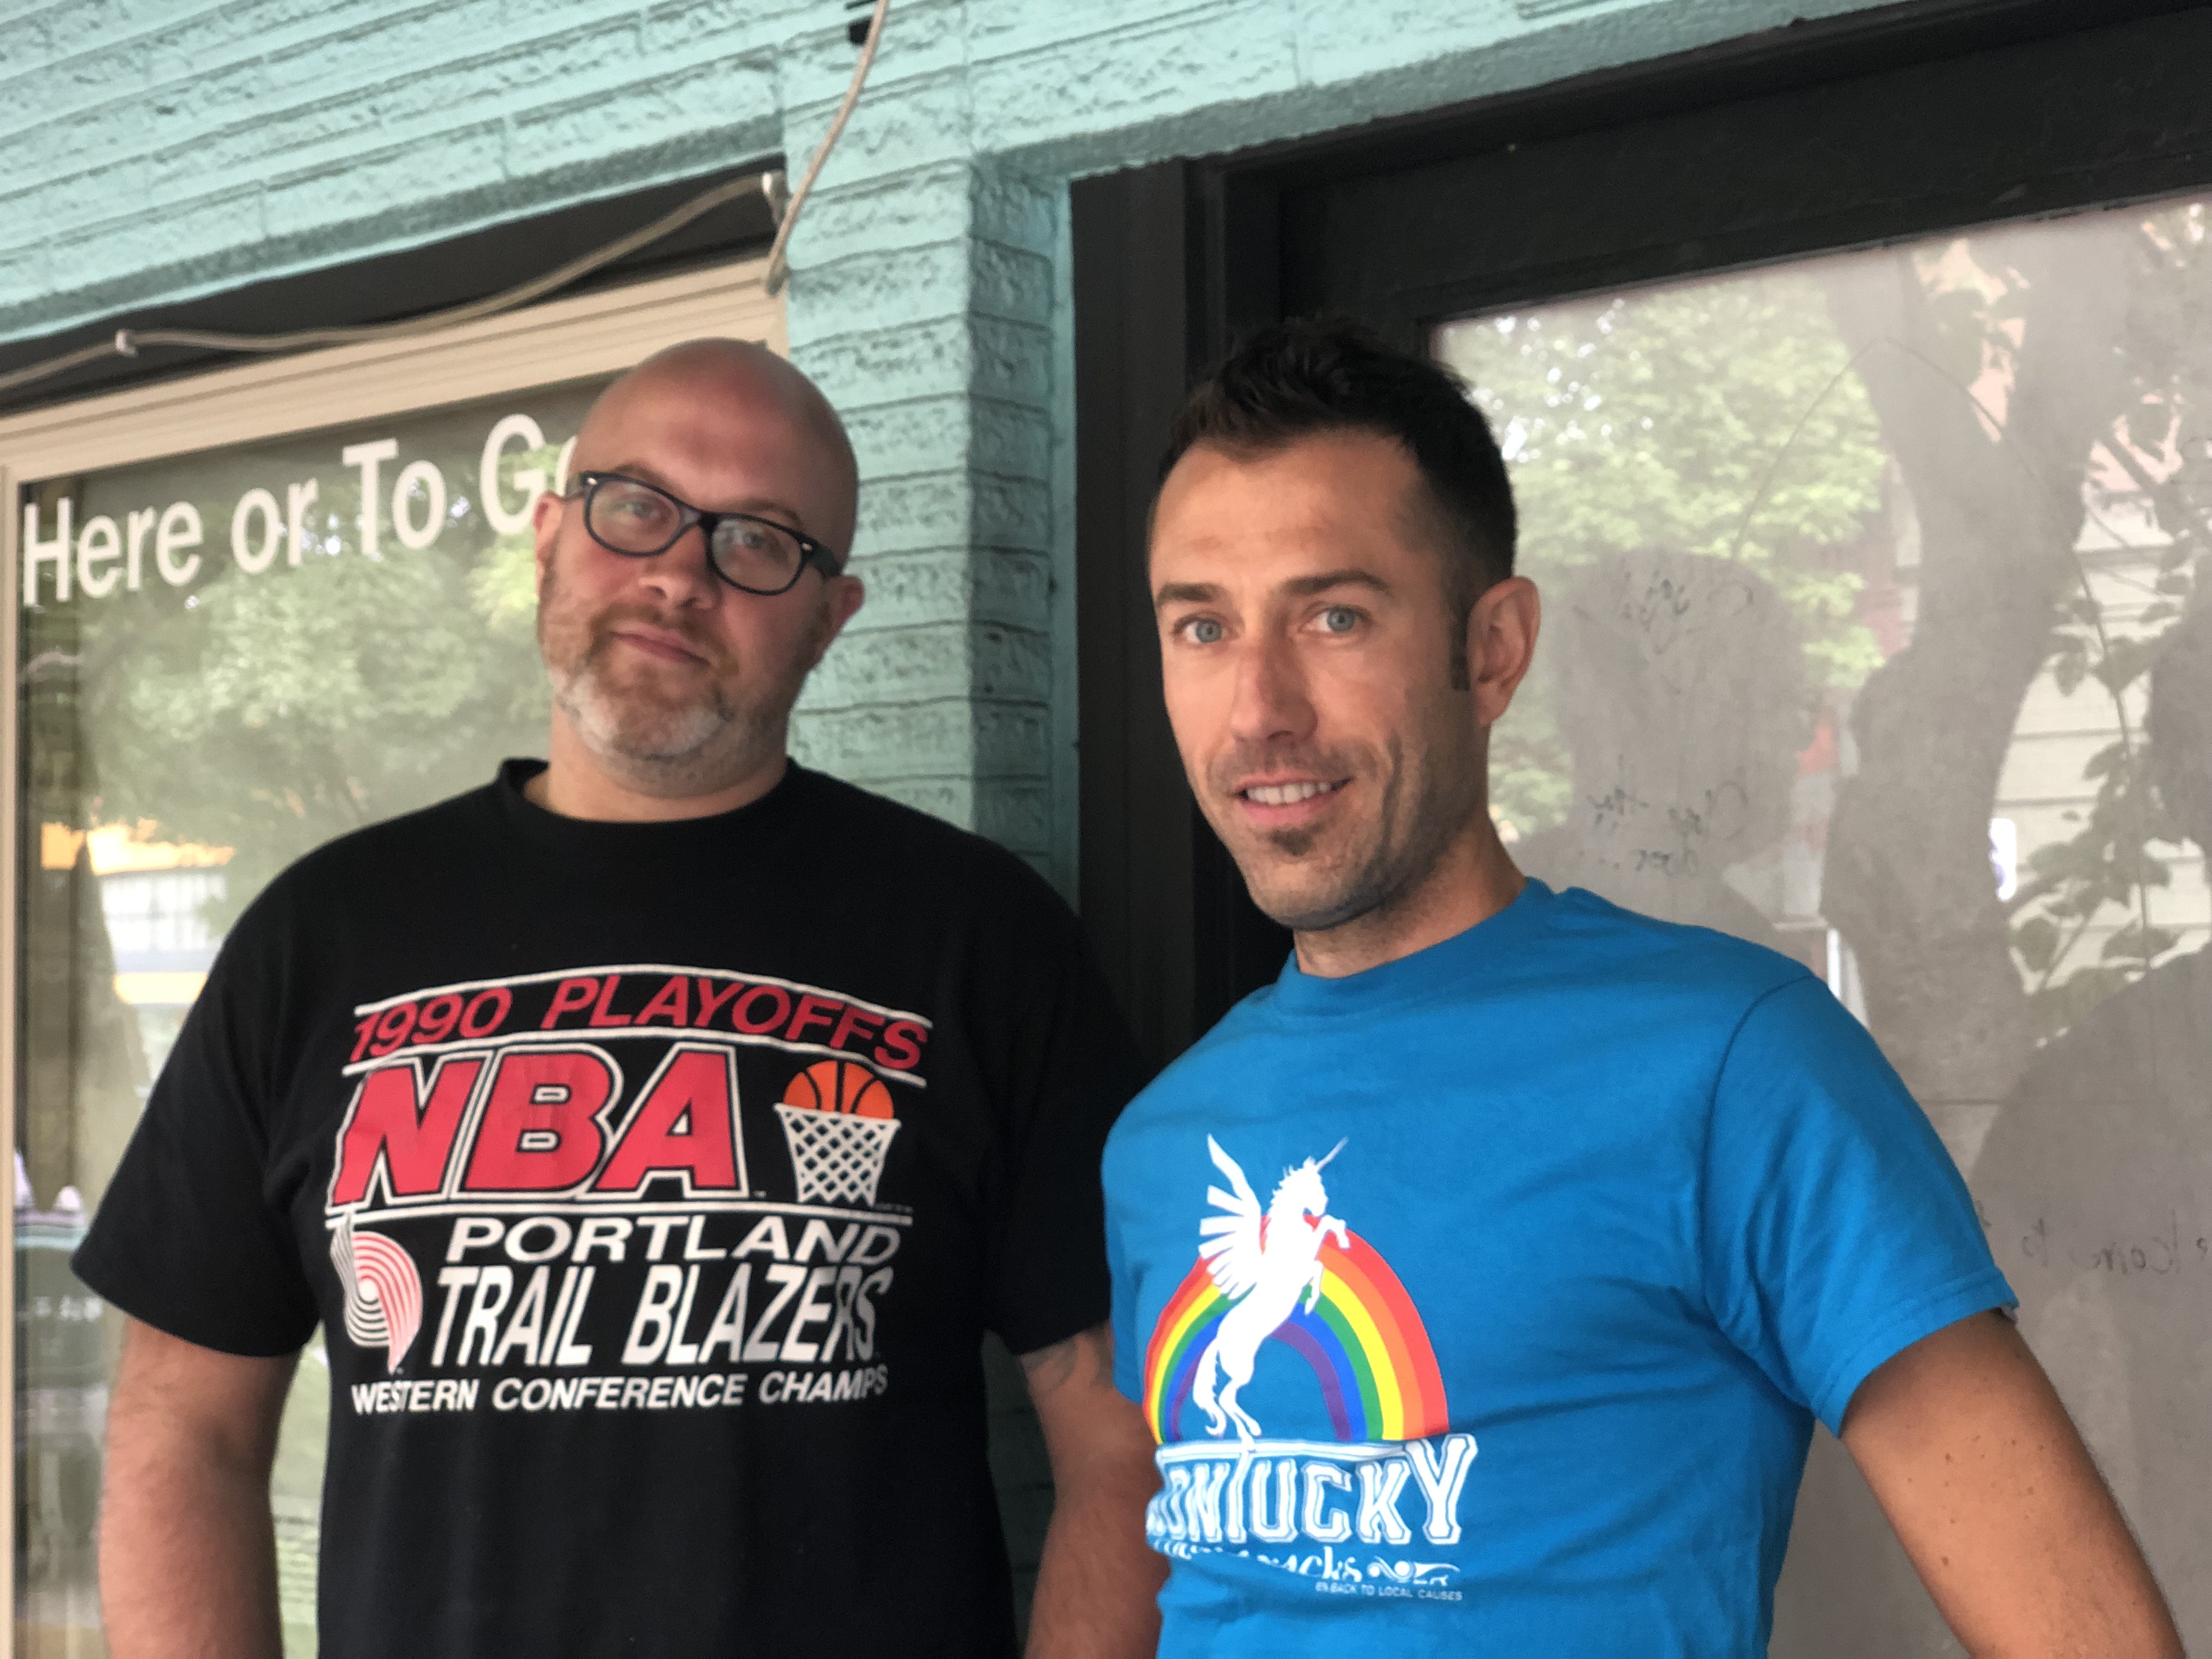 Reed and McCulloch plan to open R&amp;R Bar in September 2019